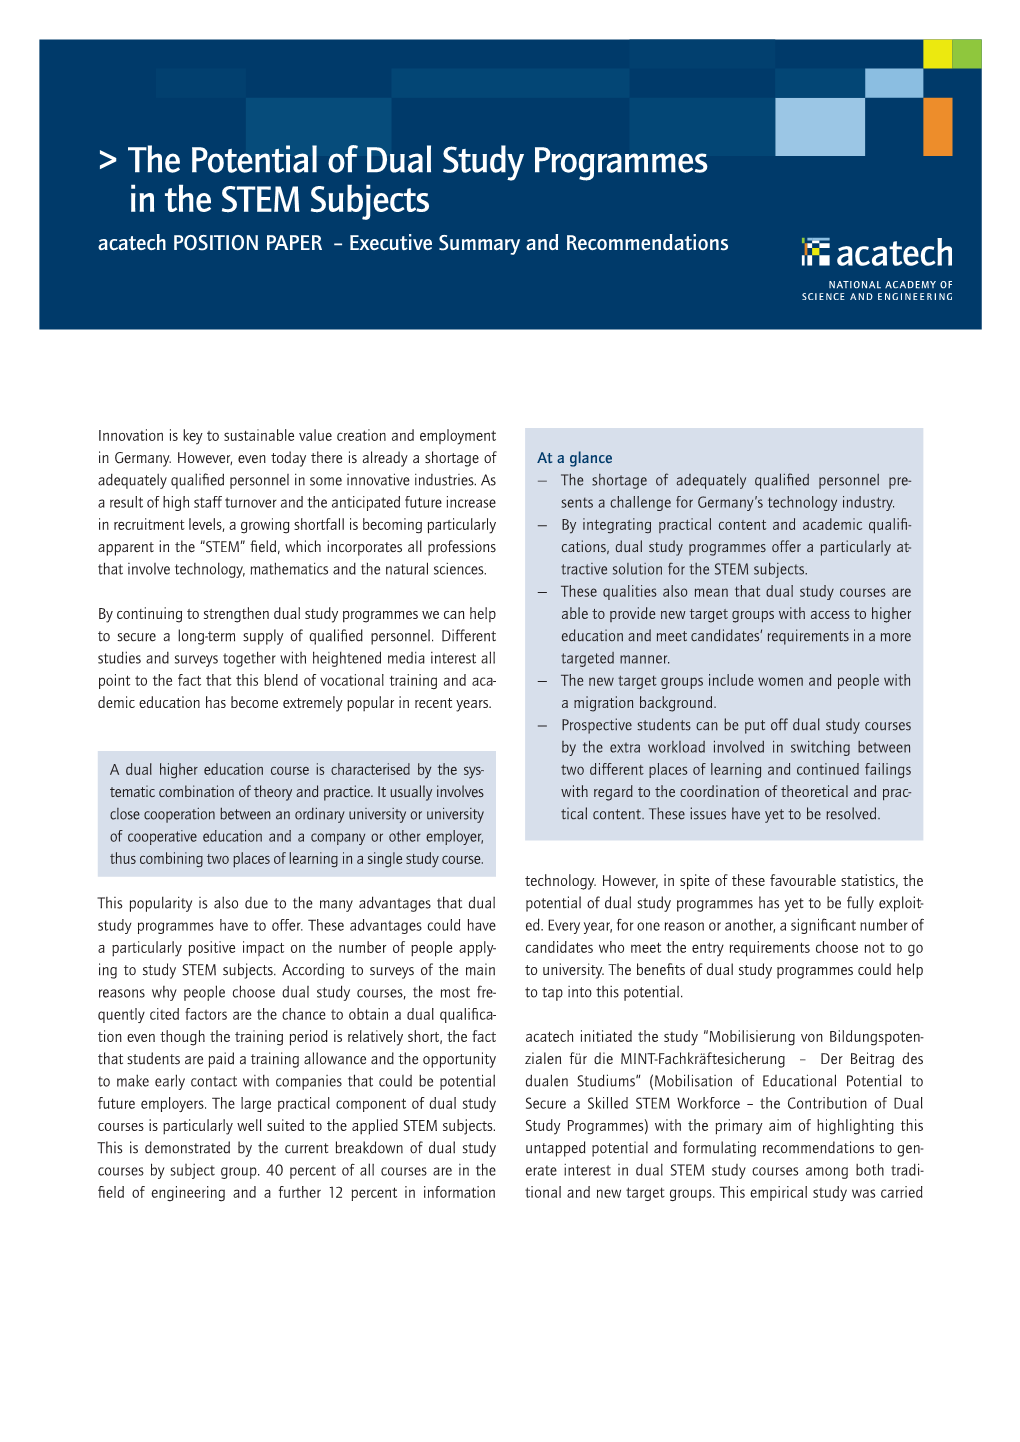 The Potential of Dual Study Programmes in the STEM Subjects Acatech POSITION PAPER – Executive Summary and Recommendations